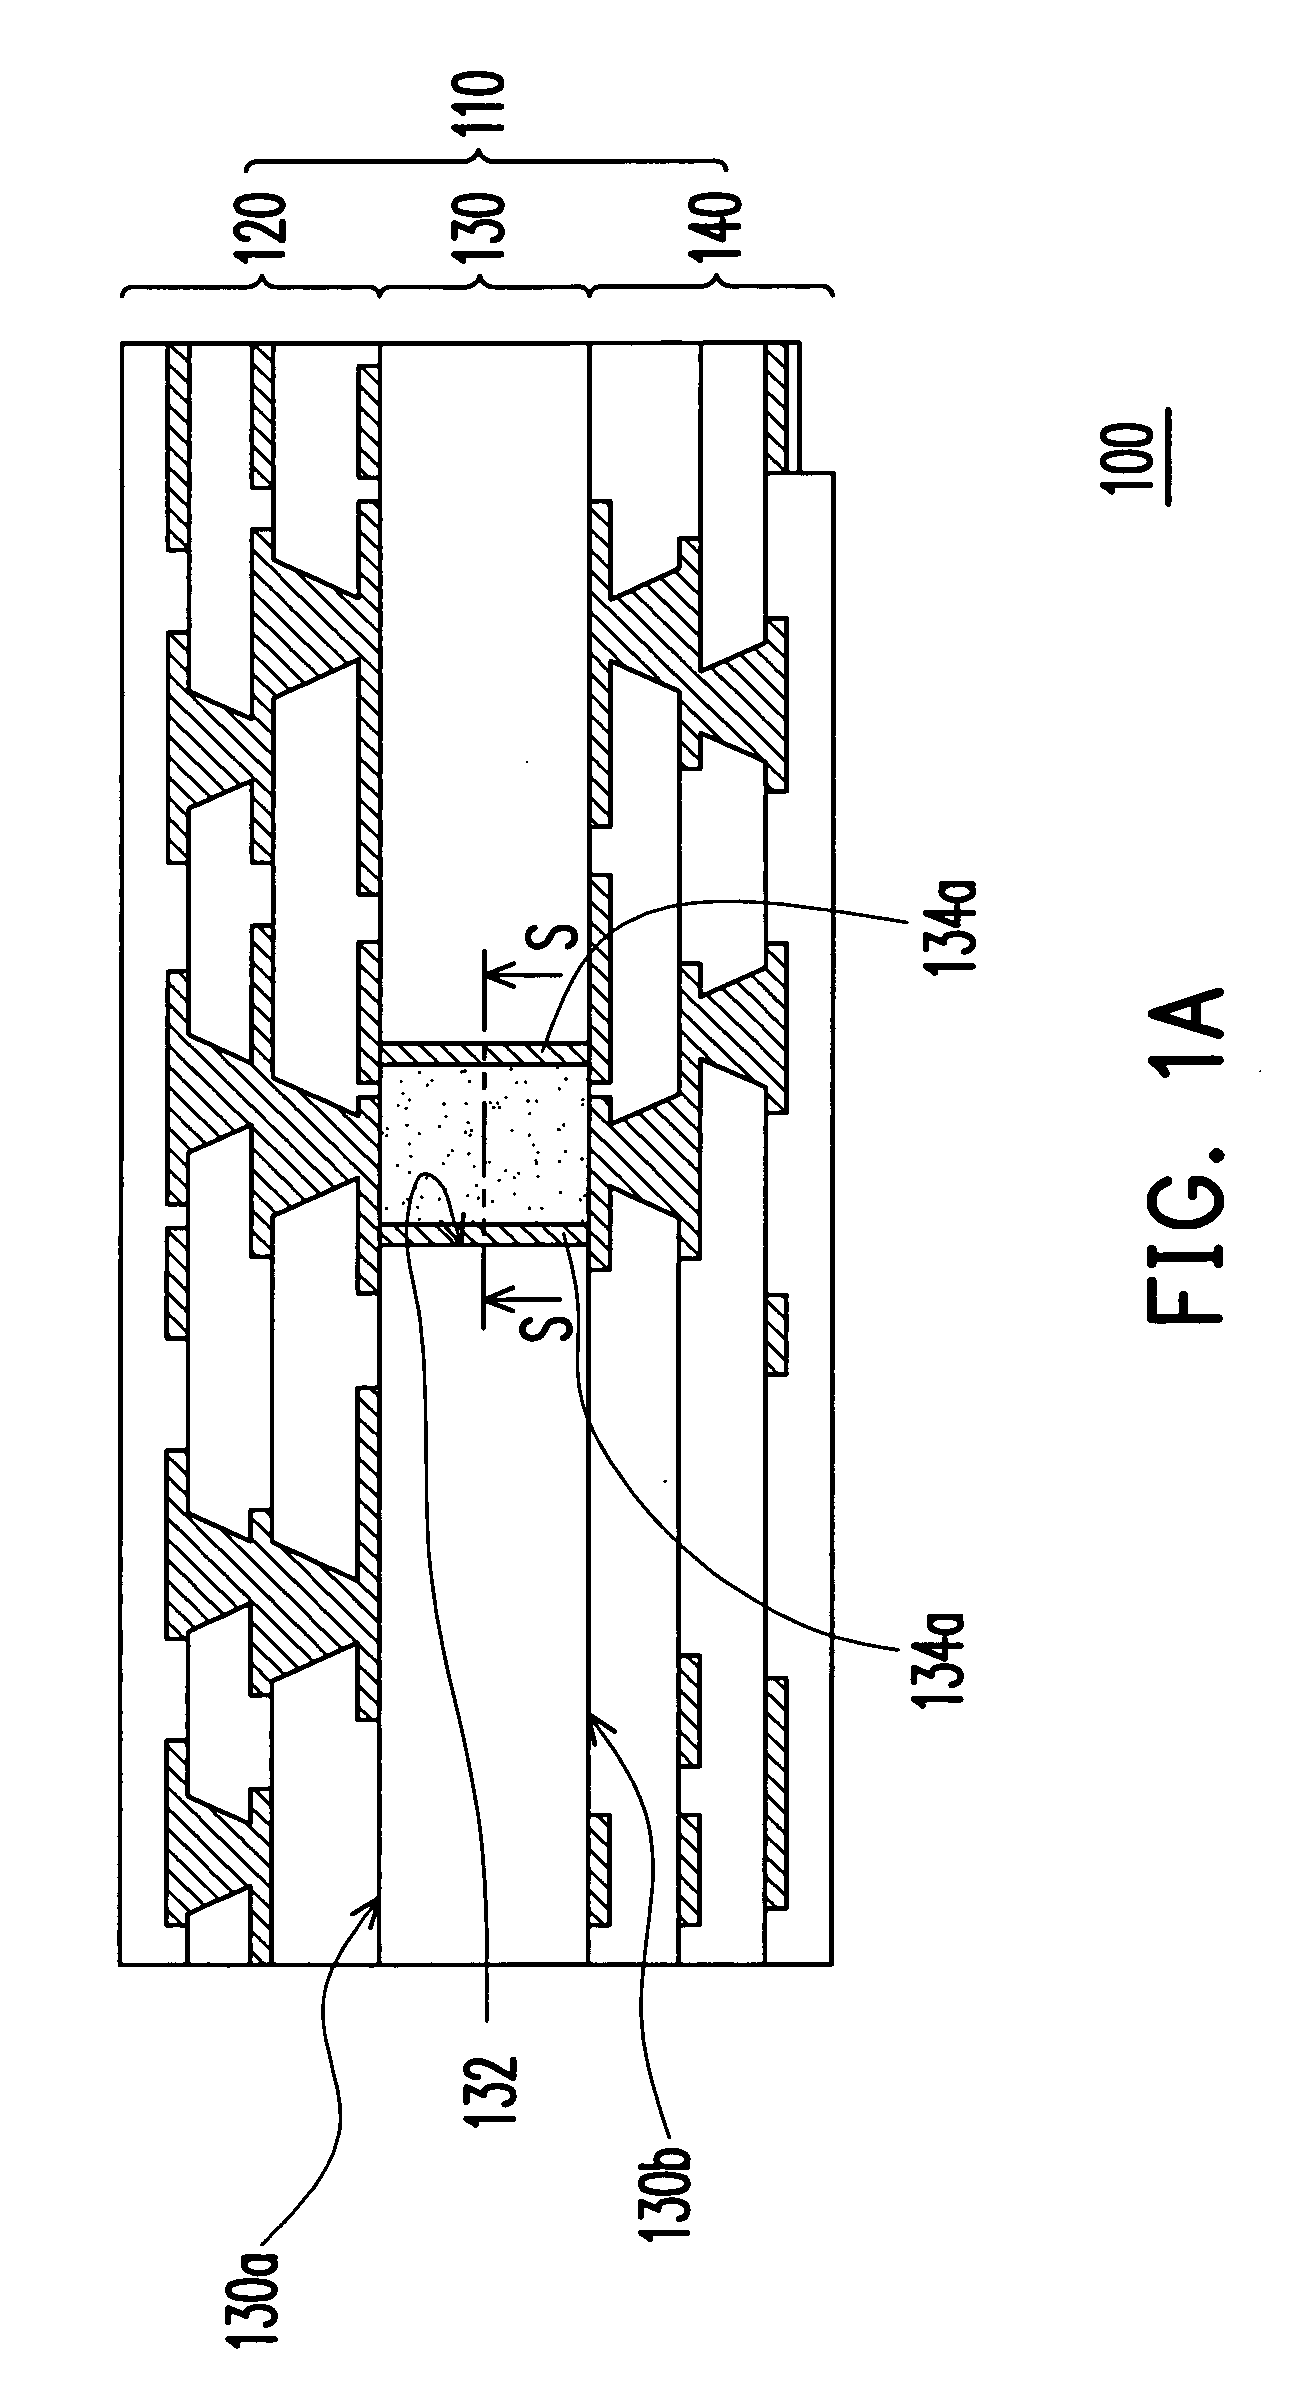 Multi-conducting through hole structure